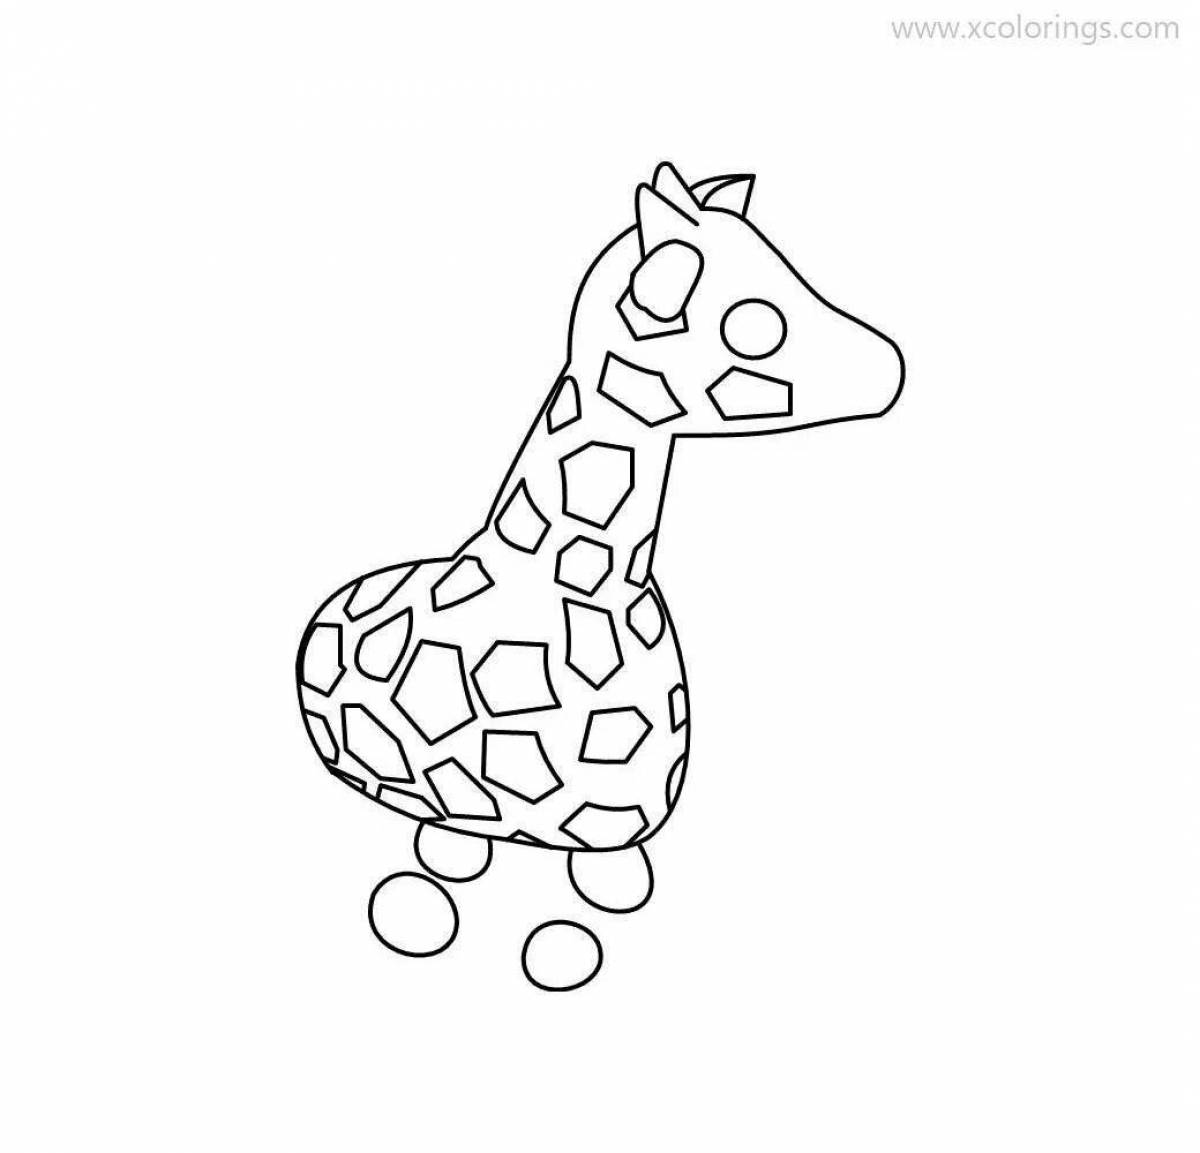 Cow adoption coloring page exciting